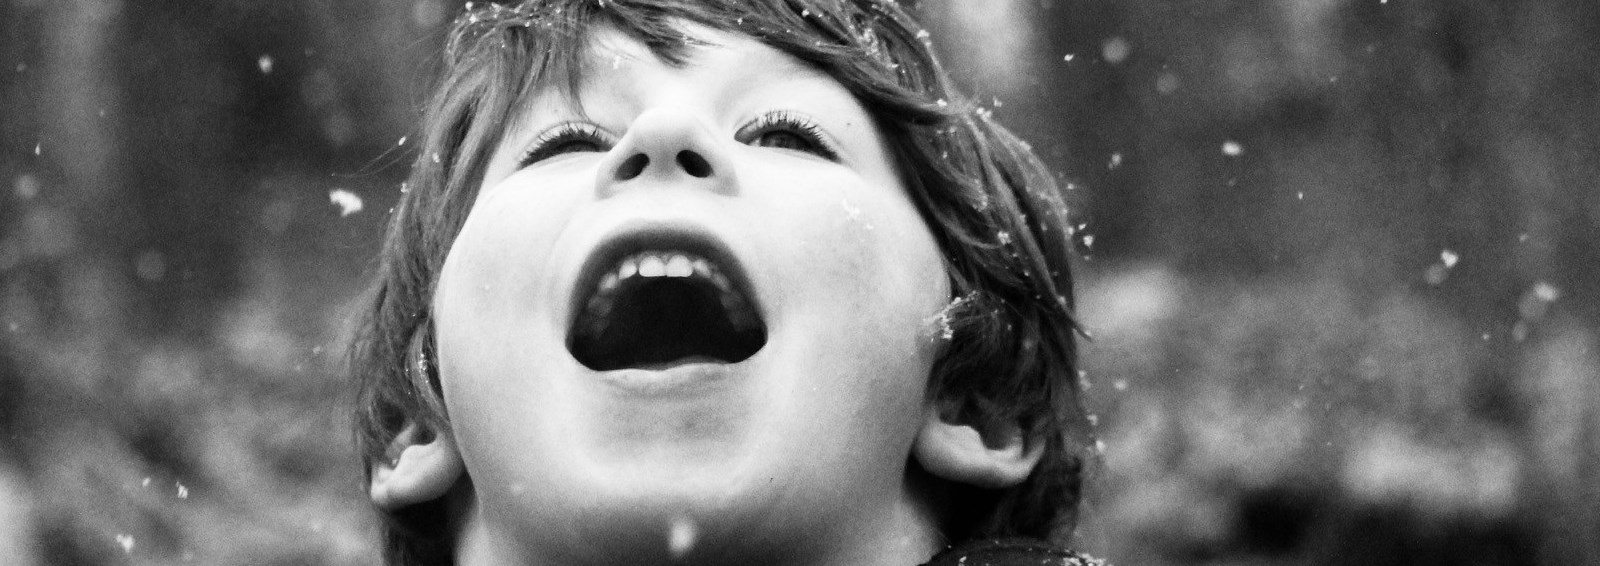 Photo of child catching snowflakes in his mouth